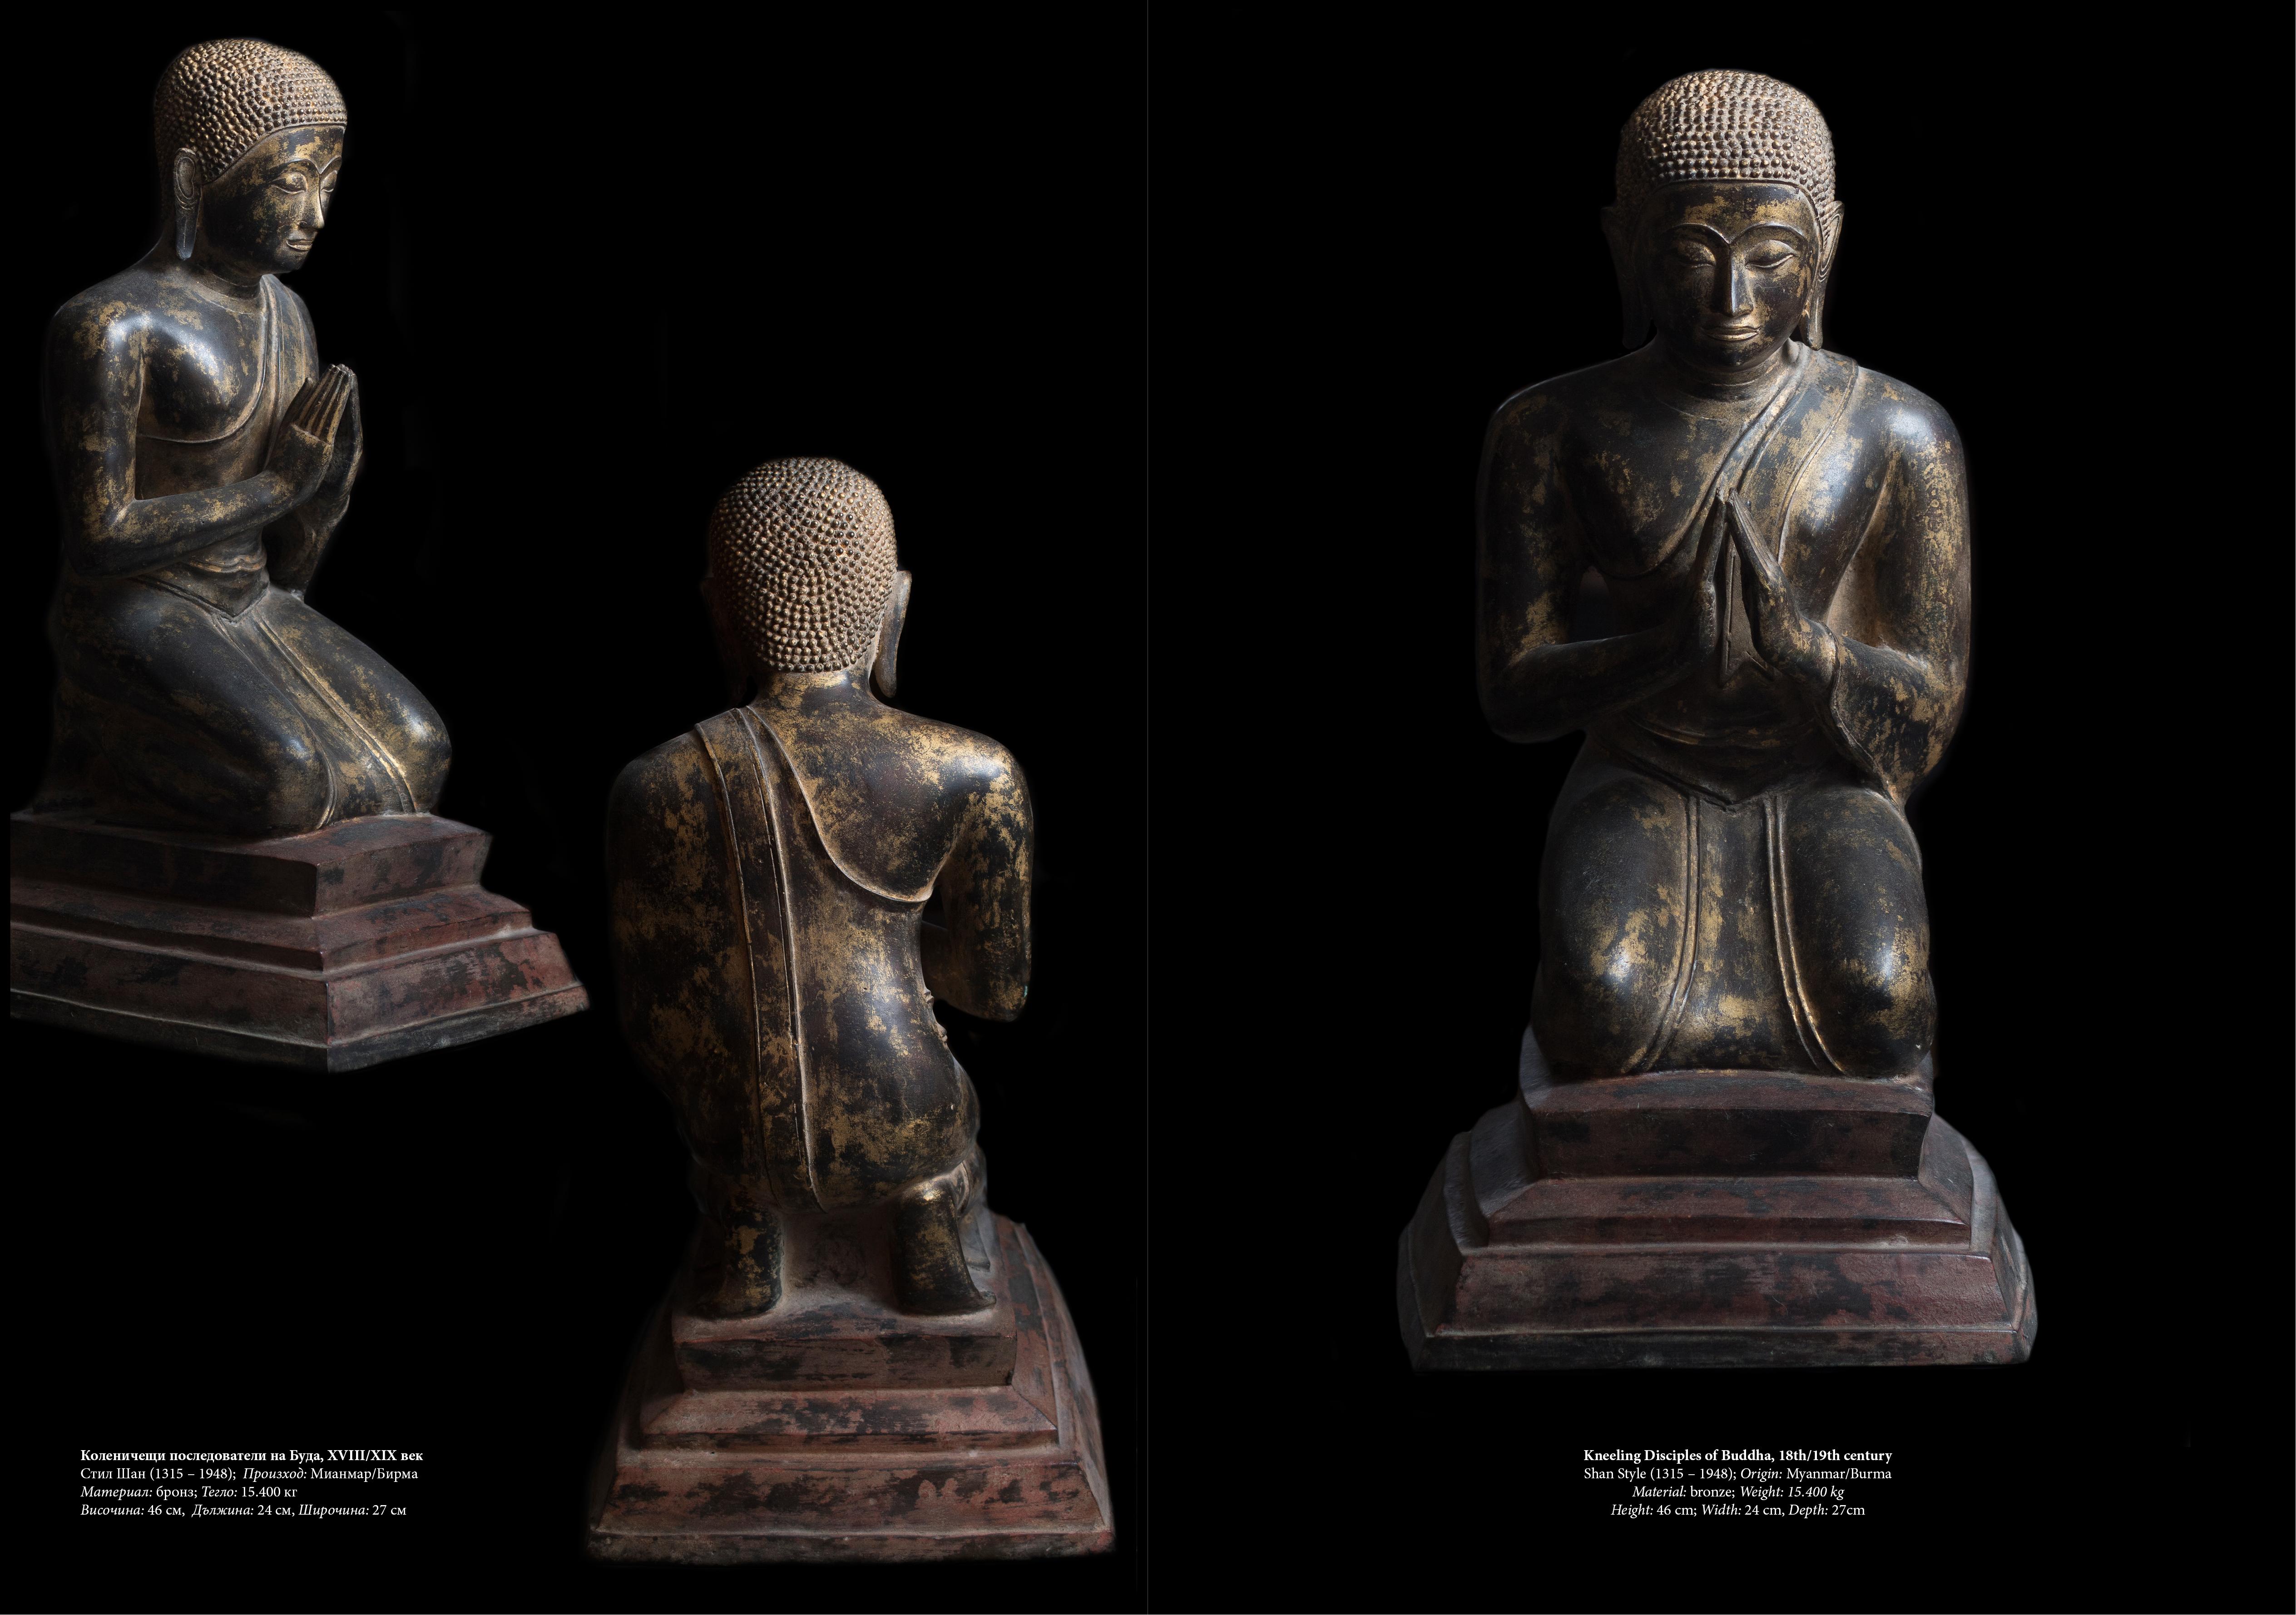 Kneeling Disciples of Buddha 18th/19th century - Sculpture by Unknown